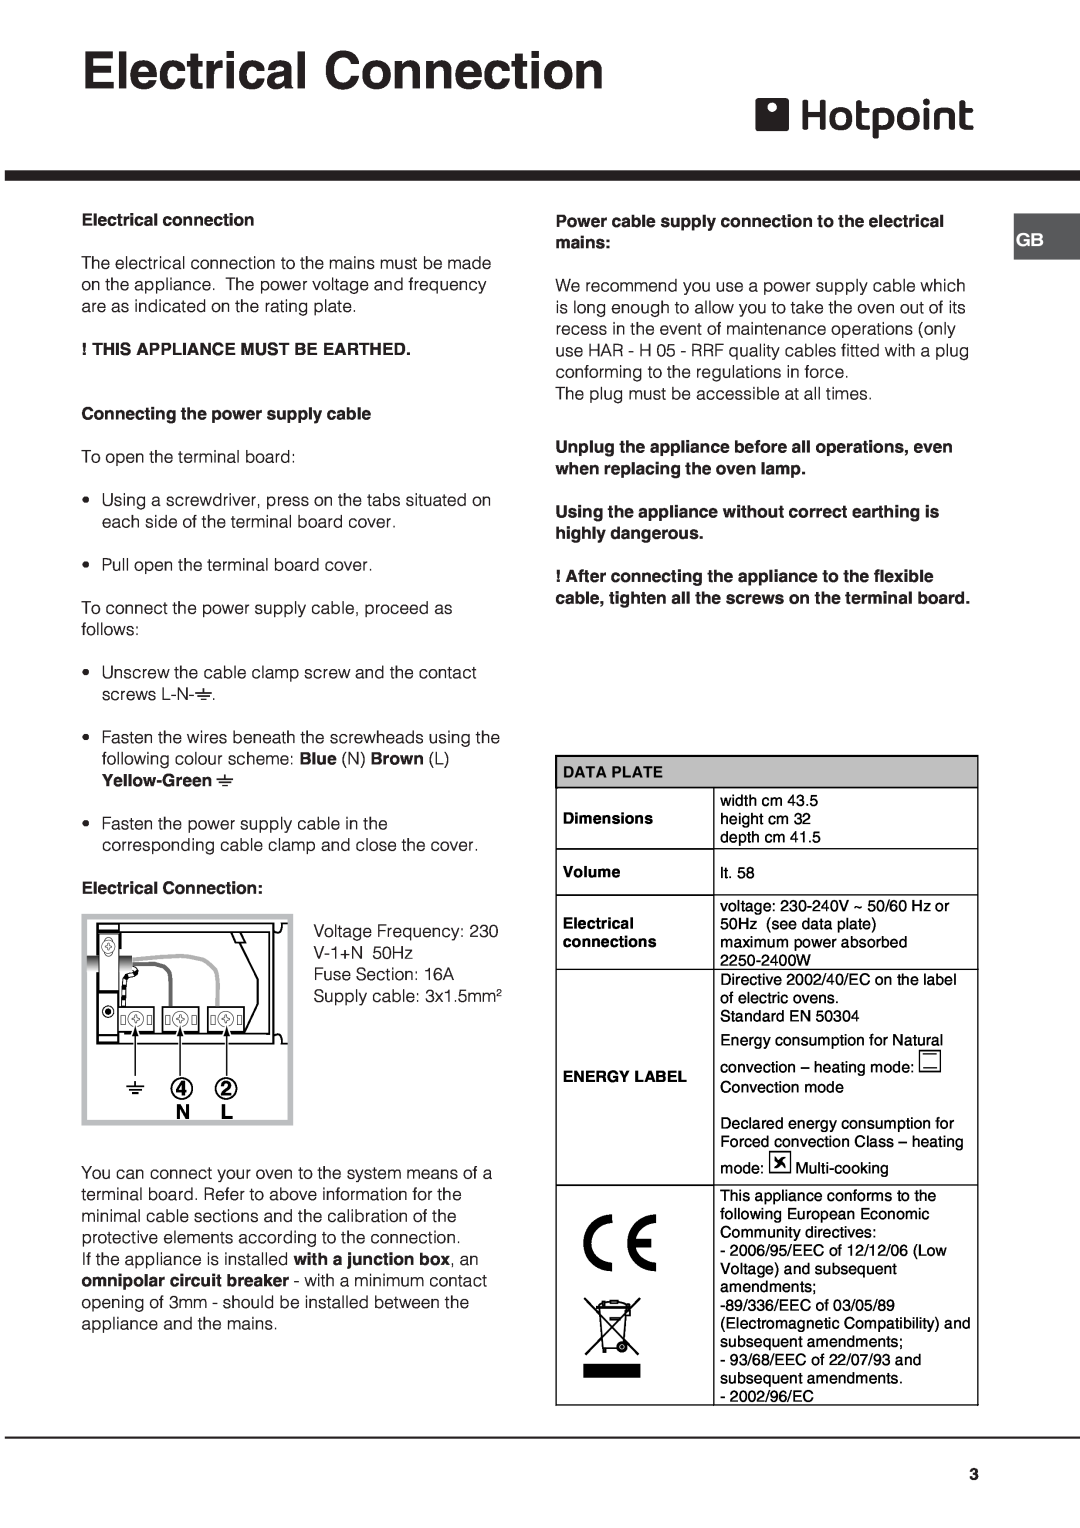 Hotpoint SY56X/1, SY10X/1 manual Electrical Connection, 4 2 N L 